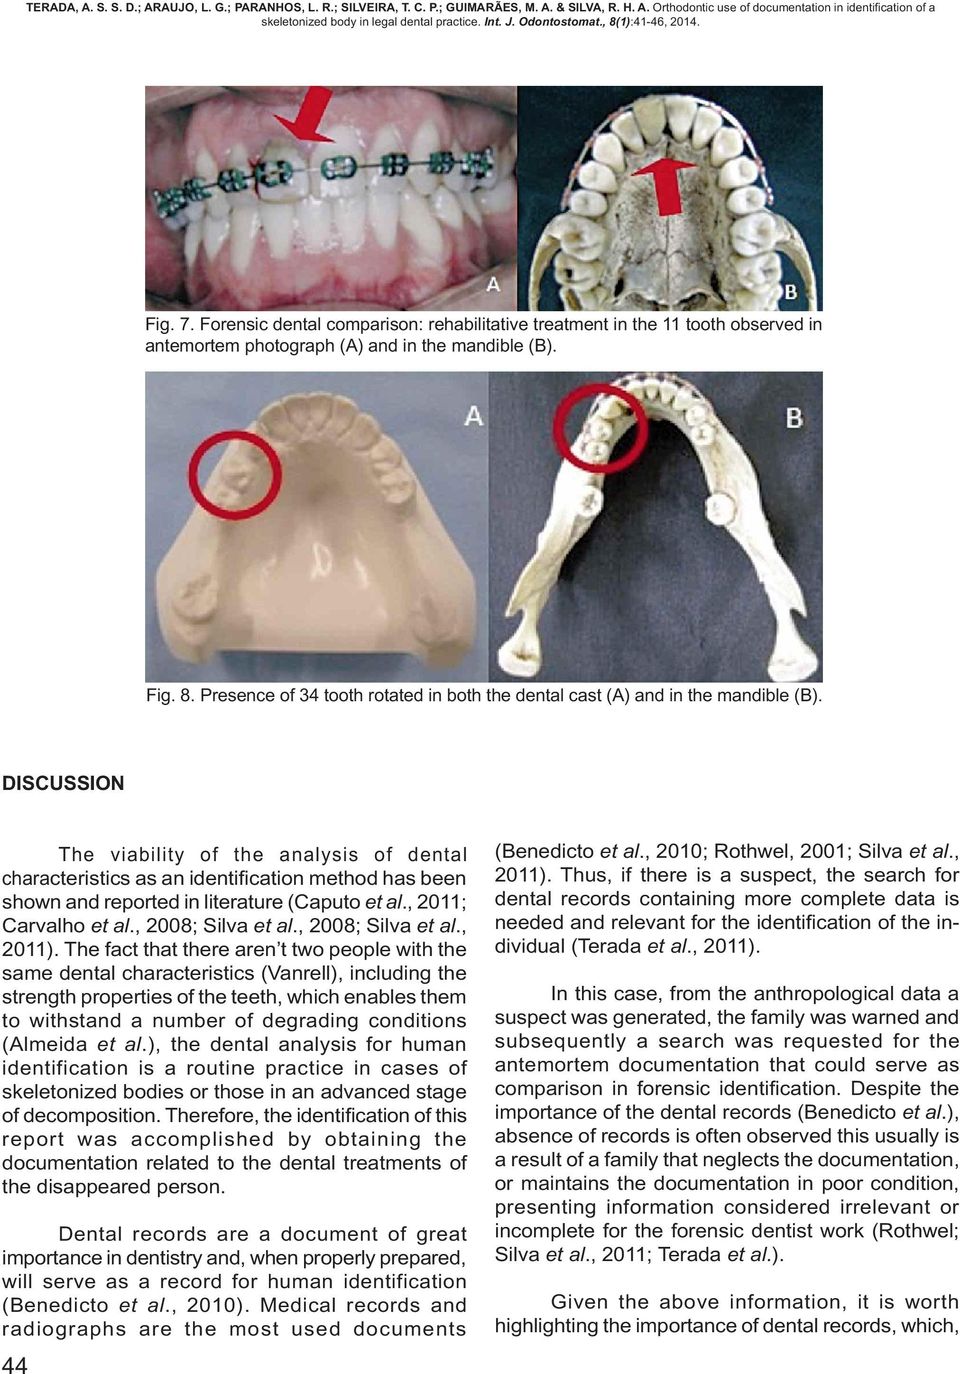 DISCUSSION The viability of the analysis of dental characteristics as an identification method has been shown and reported in literature (Caputo et al., 2011; Carvalho et al., 2008; Silva et al.